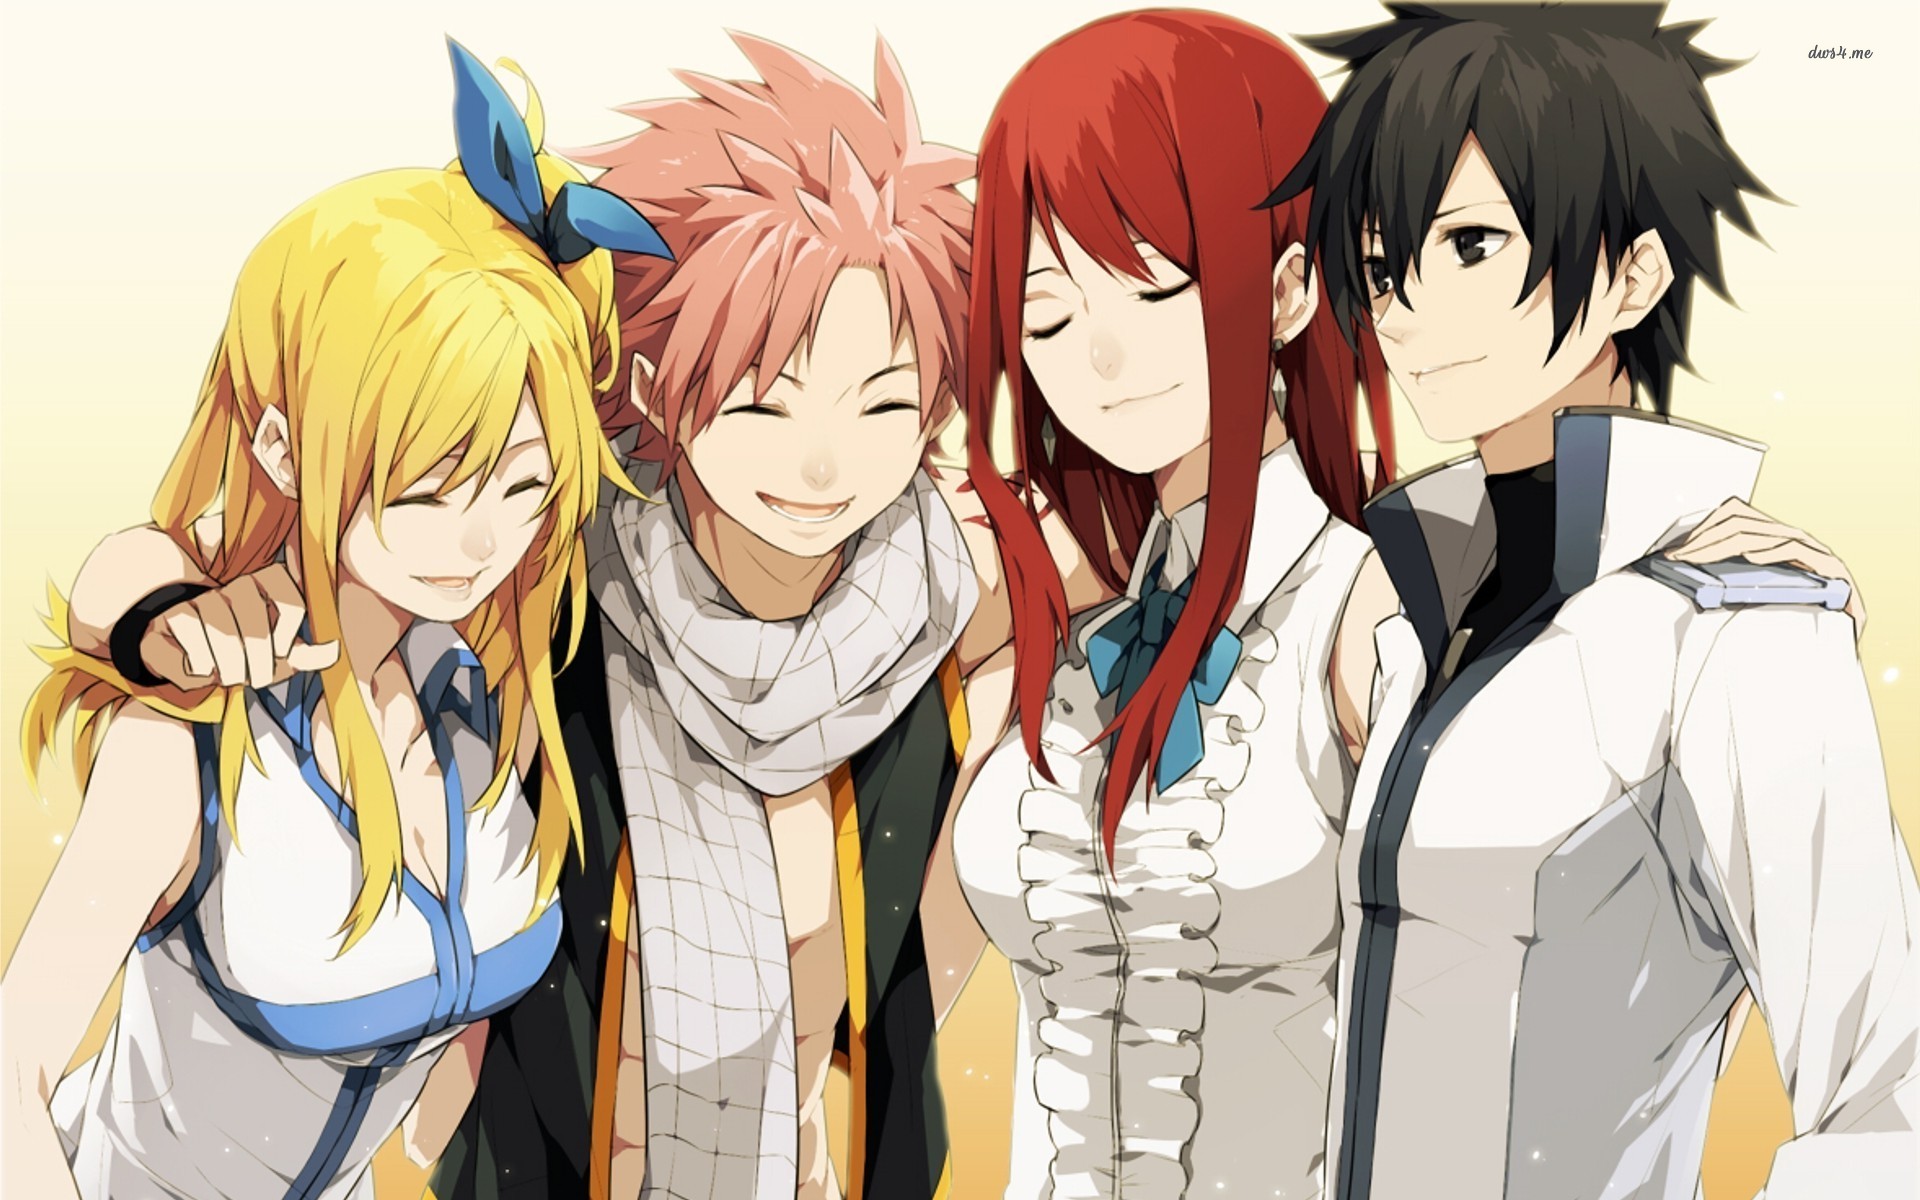 August 3, 2015 - 1024x1024px Fairy Tail Desktop Wallpapers - Anime ...